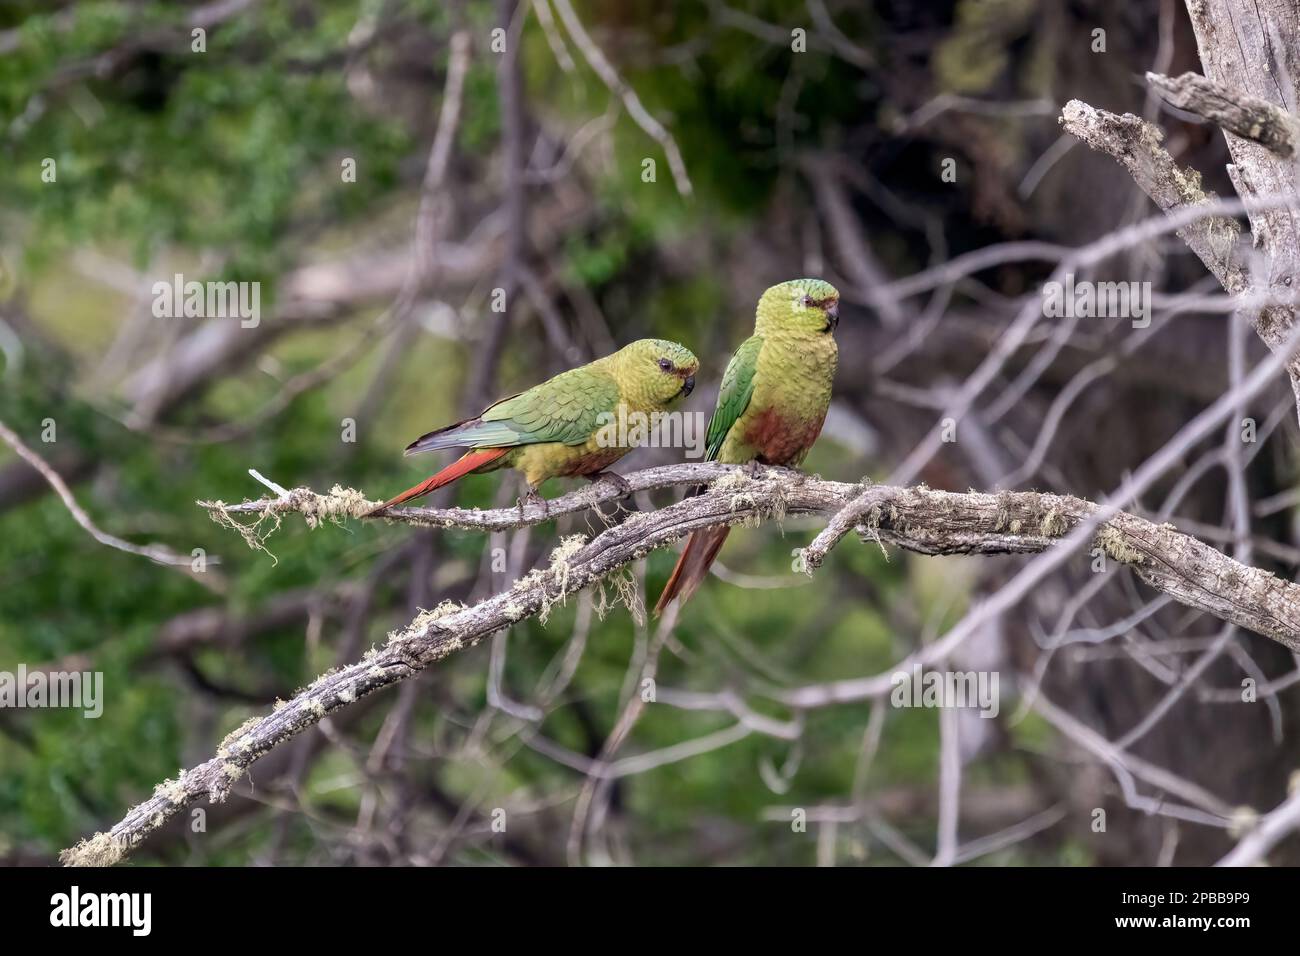 Pair of Austral parakeets (Enicognathus ferrugineus) in a tree, Chacabuca Valley, Patagonia Stock Photo